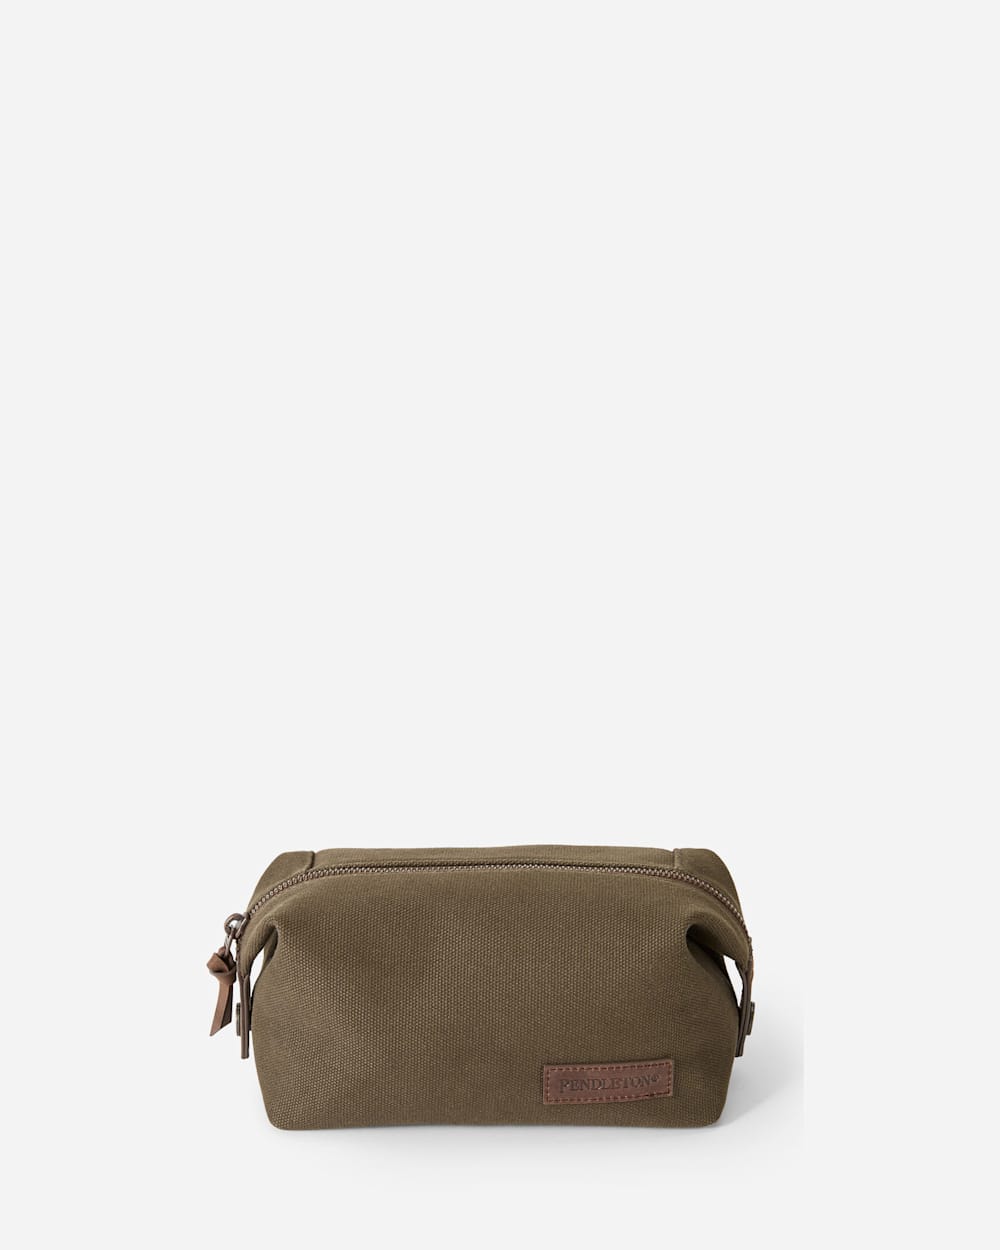 ALTERNATE VIEW OF BRIDGER STRIPE TRAVEL POUCH IN BROWN image number 2